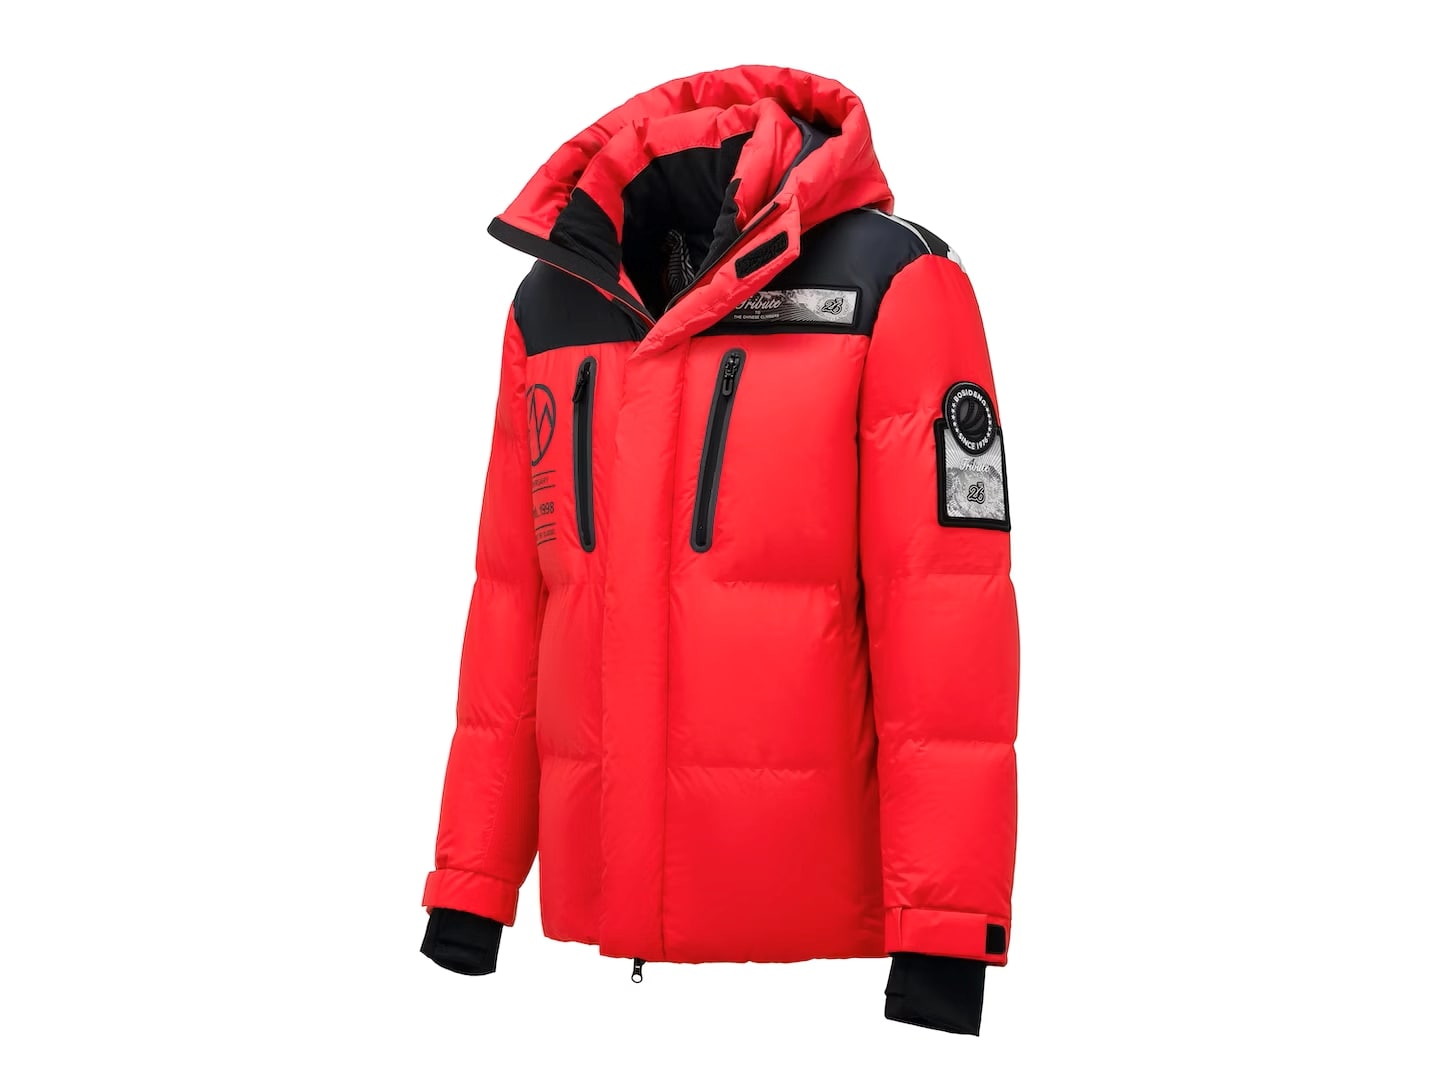 The Qomolangma III Plateau Down Jacket by Bosideng has been nominated ...